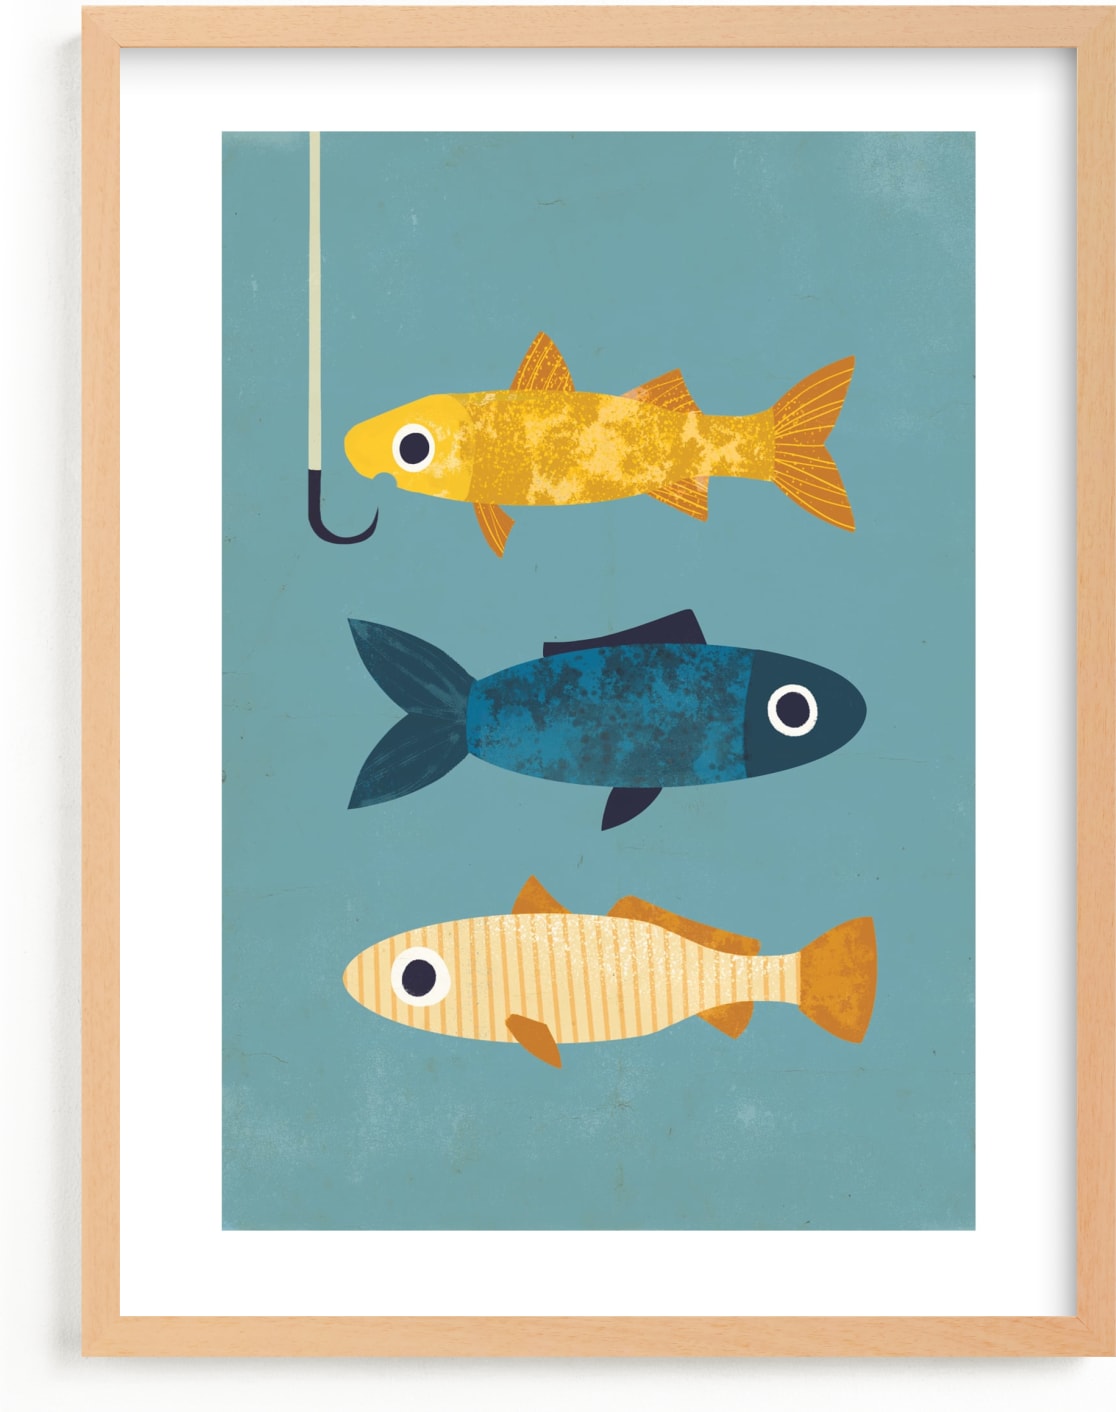 This is a blue kids wall art by Laura Mitchell called 1 Fish, 2 Fish, 3 Fish.